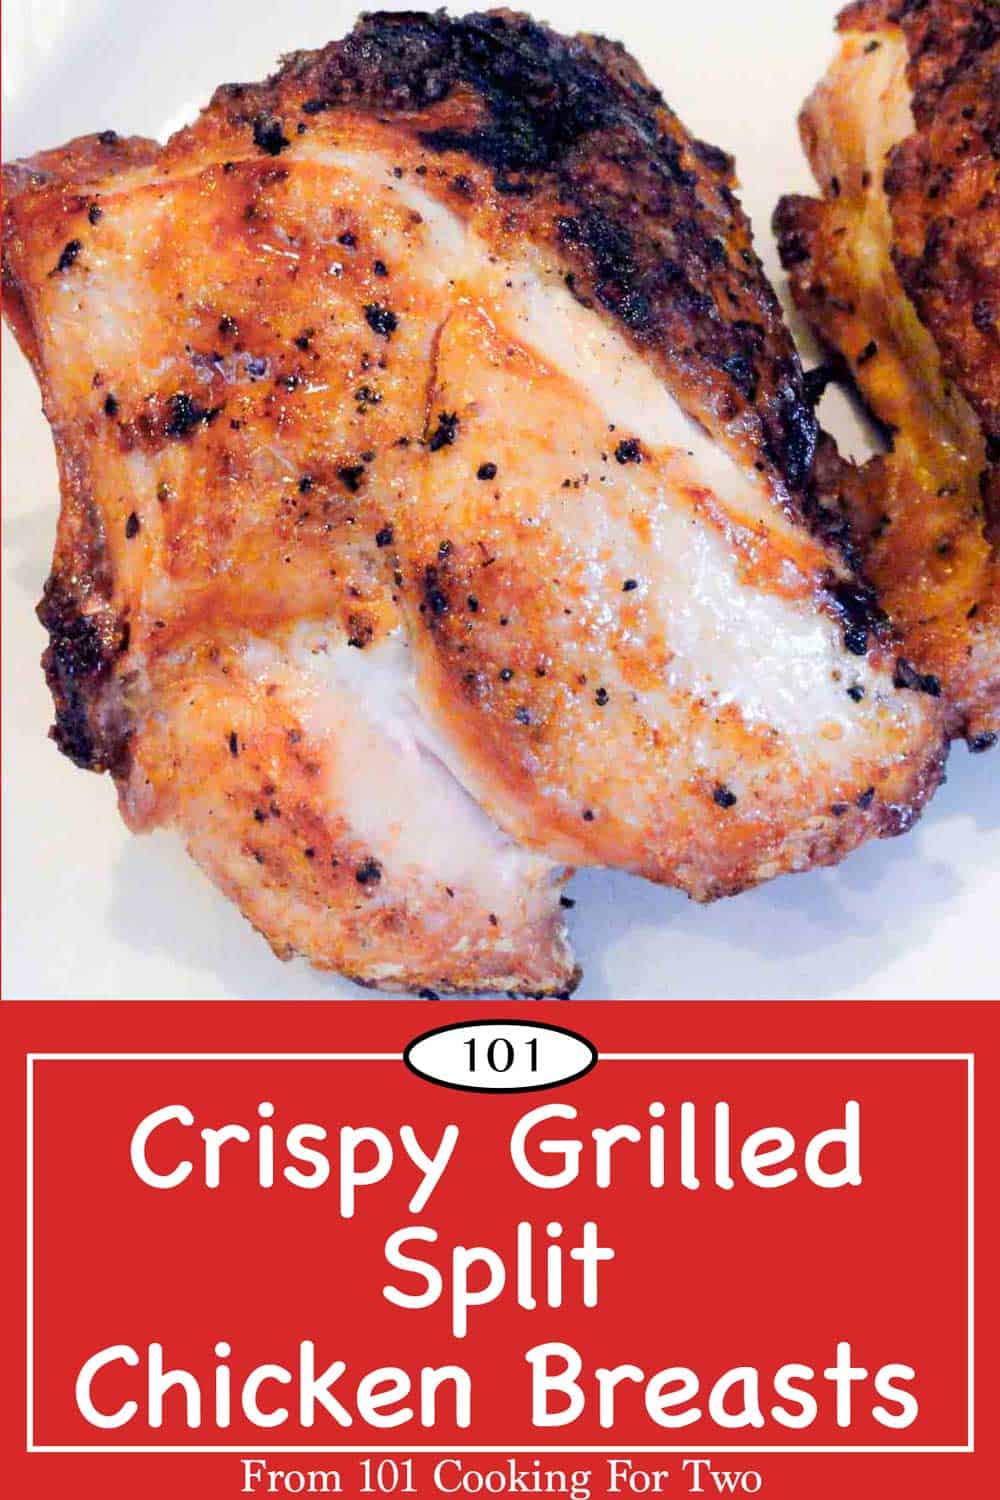 Grilled Split Chicken Breasts—Crispy and Delicious - 101 Cooking For Two